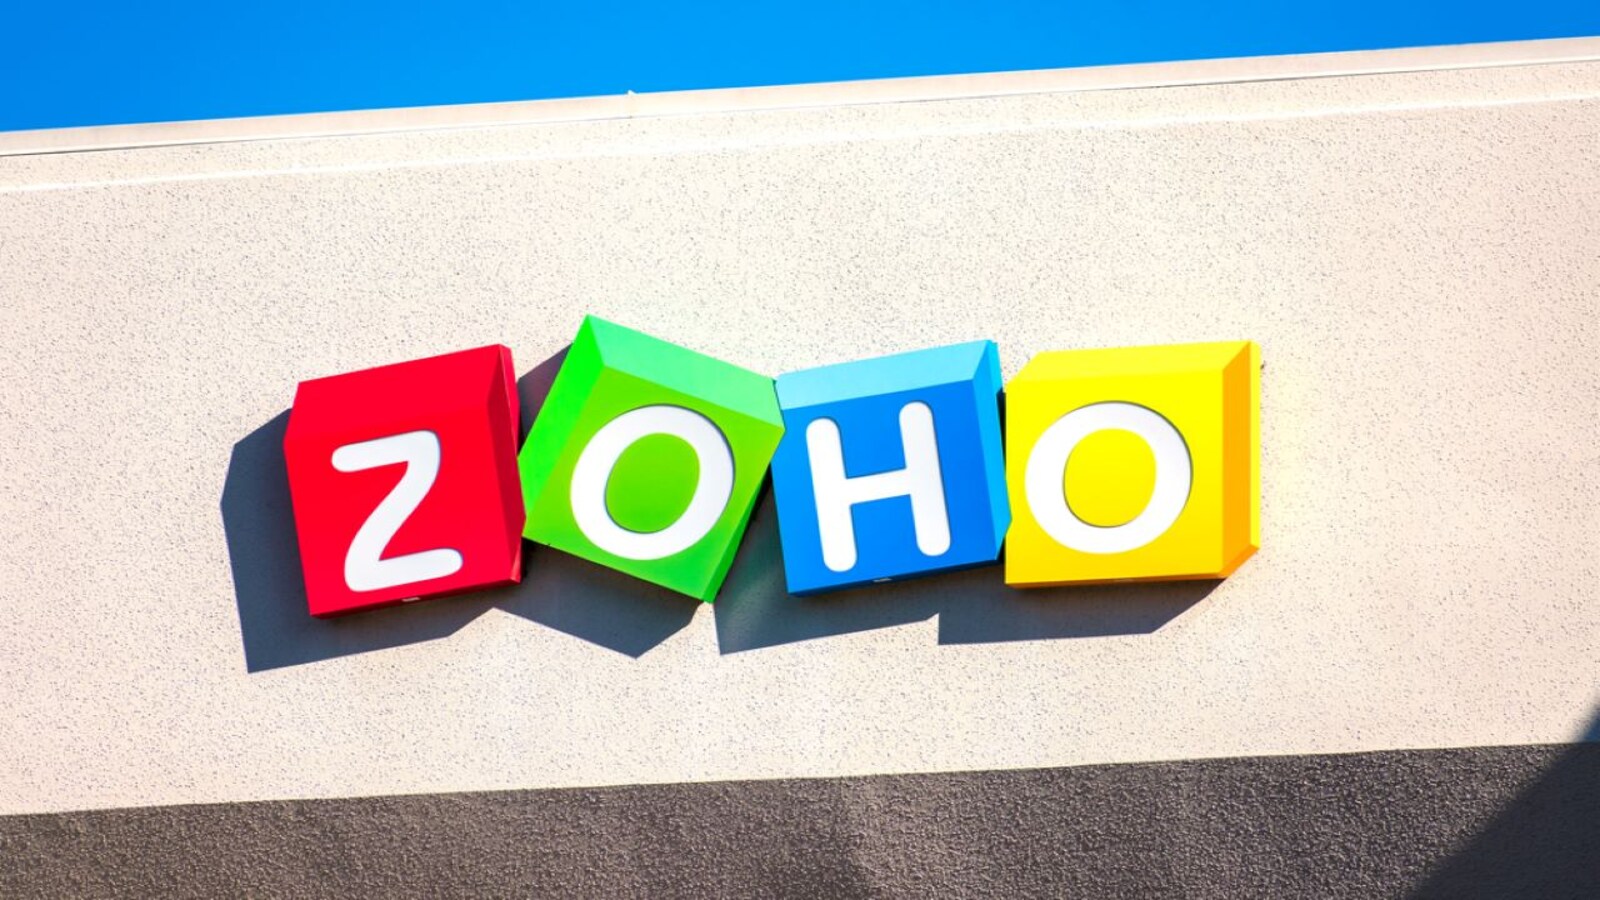 Zoho introduces new apps and services to boost its business software suite  Zoho One